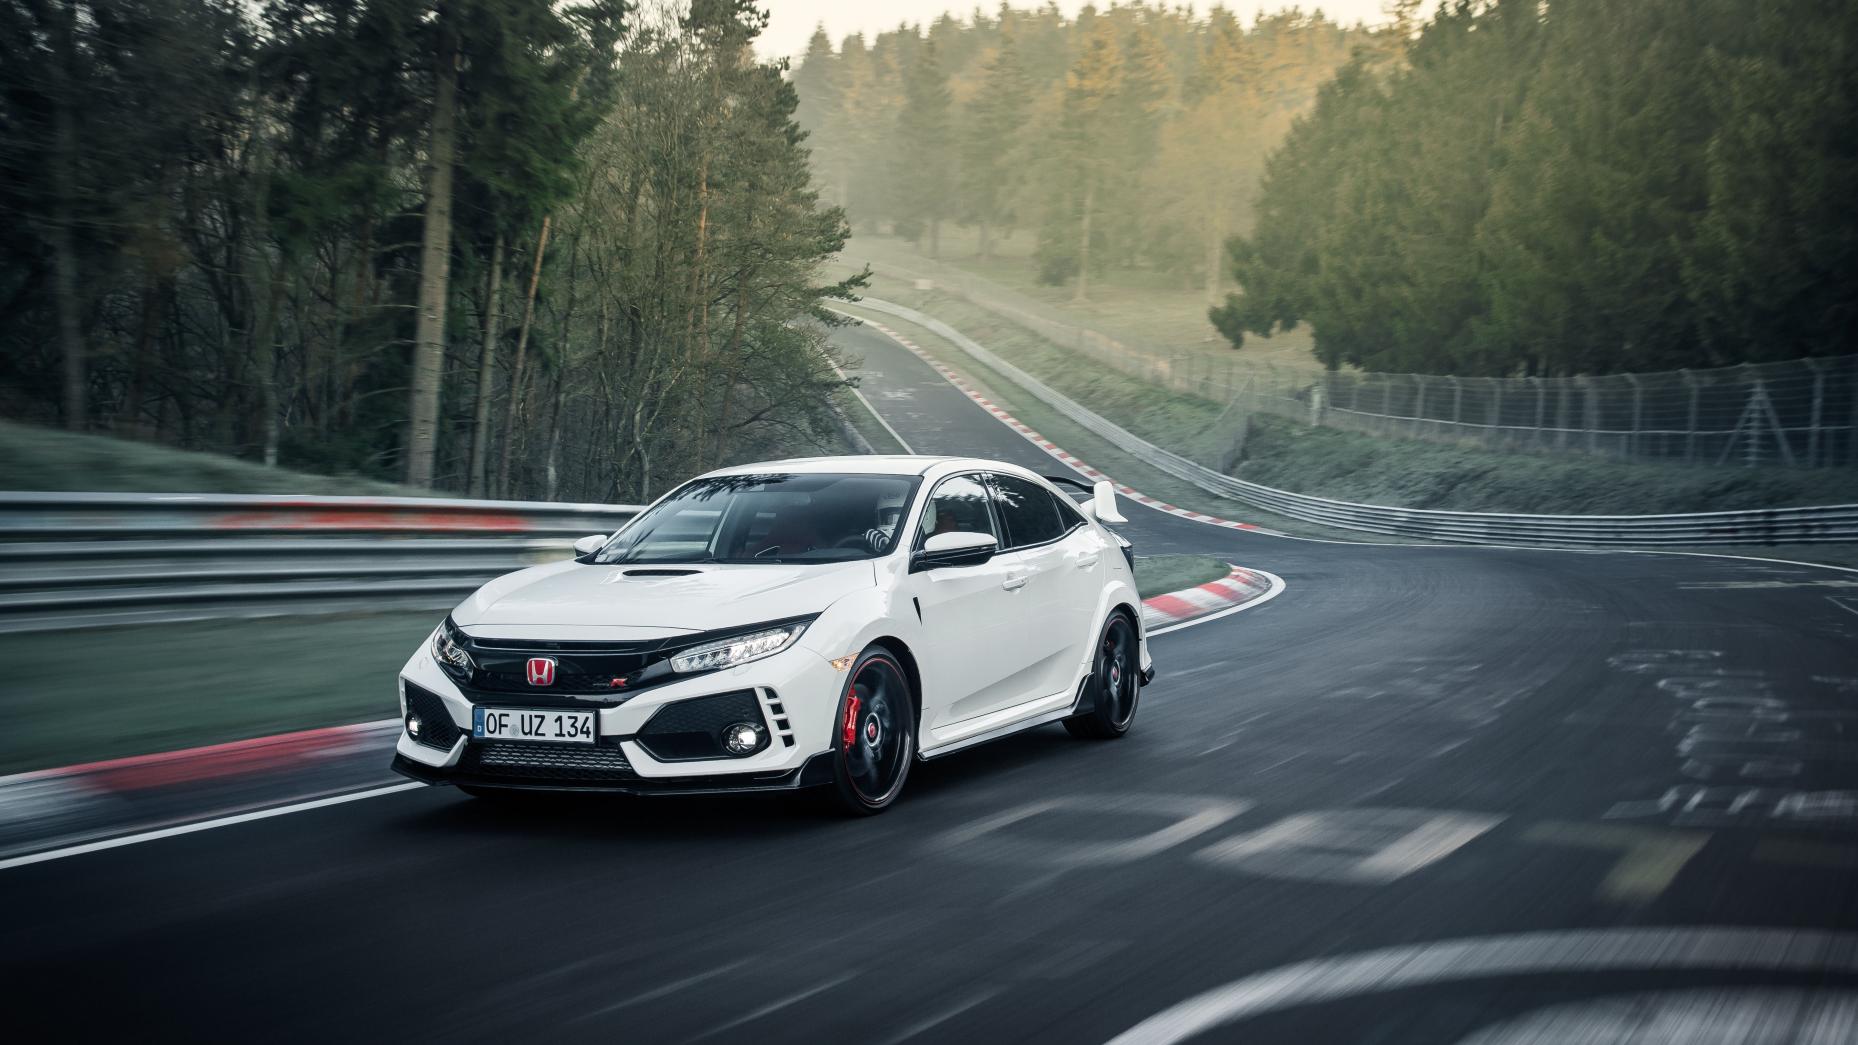 Permaisuri Ten Facts About All New Honda Civic Type R